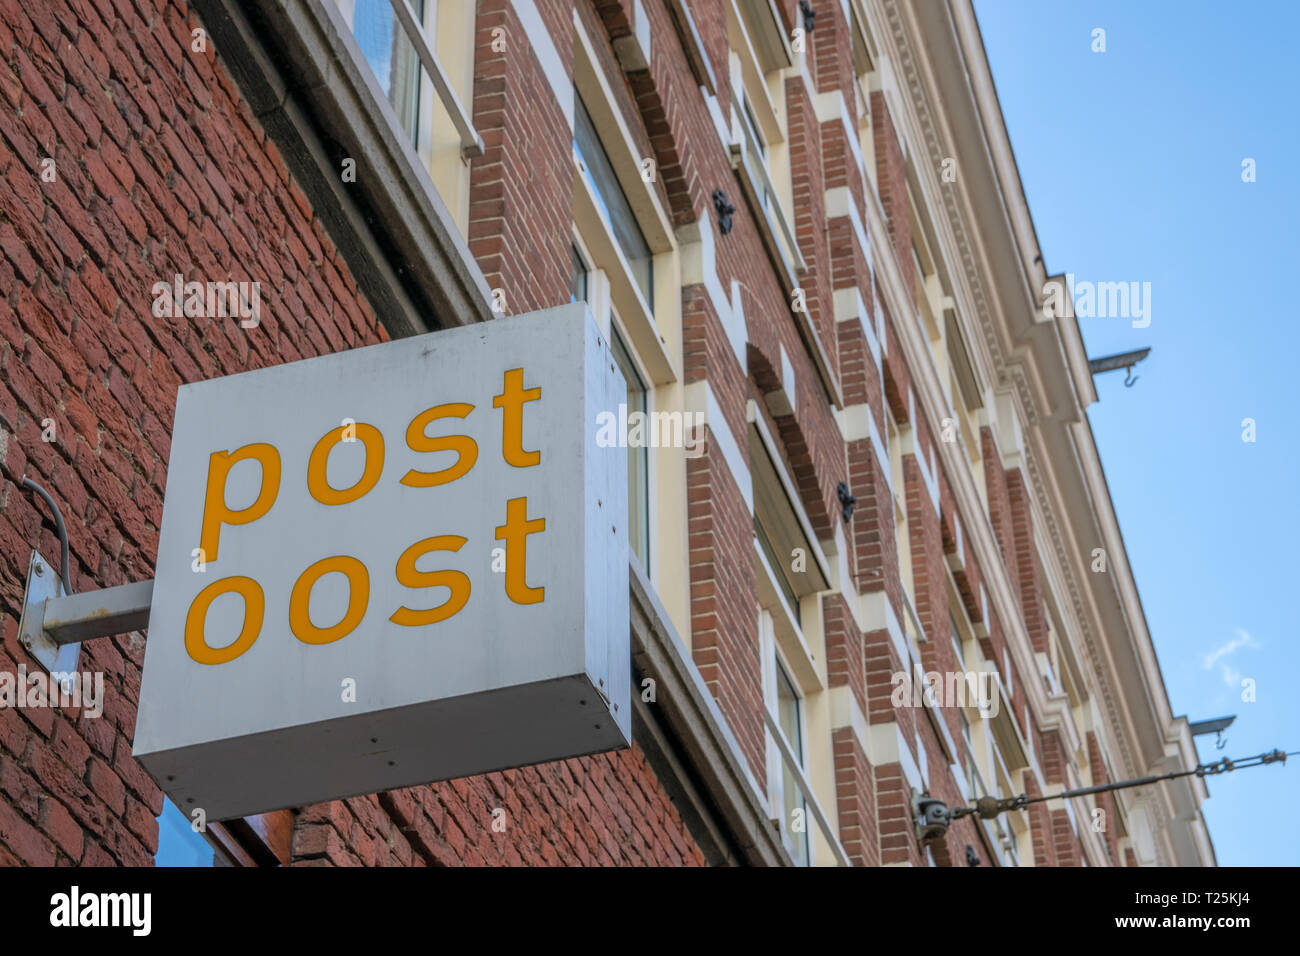 Billboard Post Oost At Amsterdam East The Netherlands 2019 Stock Photo